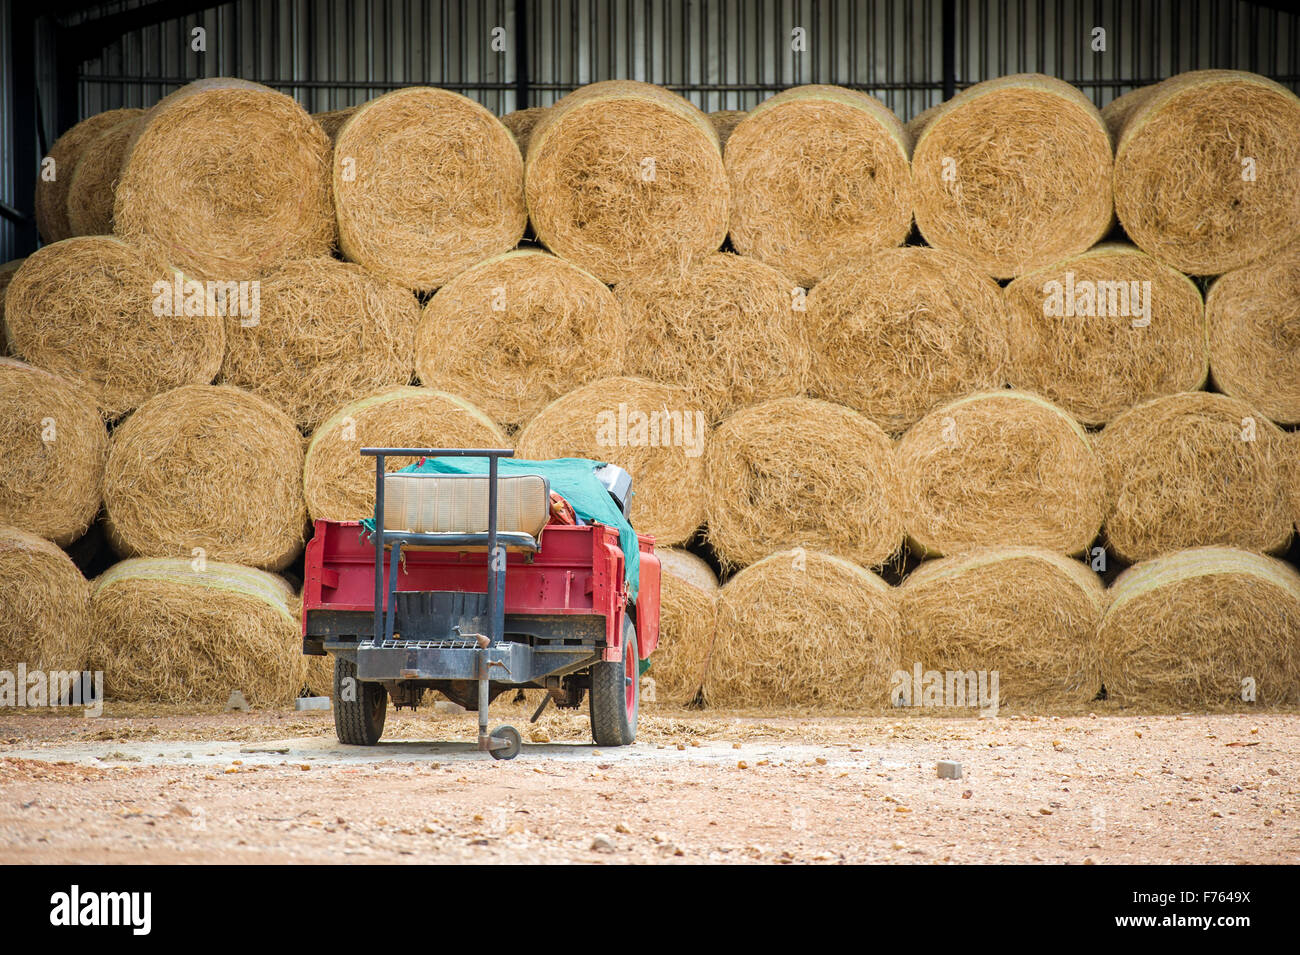 red wagon near stacks of baled hay on a farm in South Africa Stock Photo